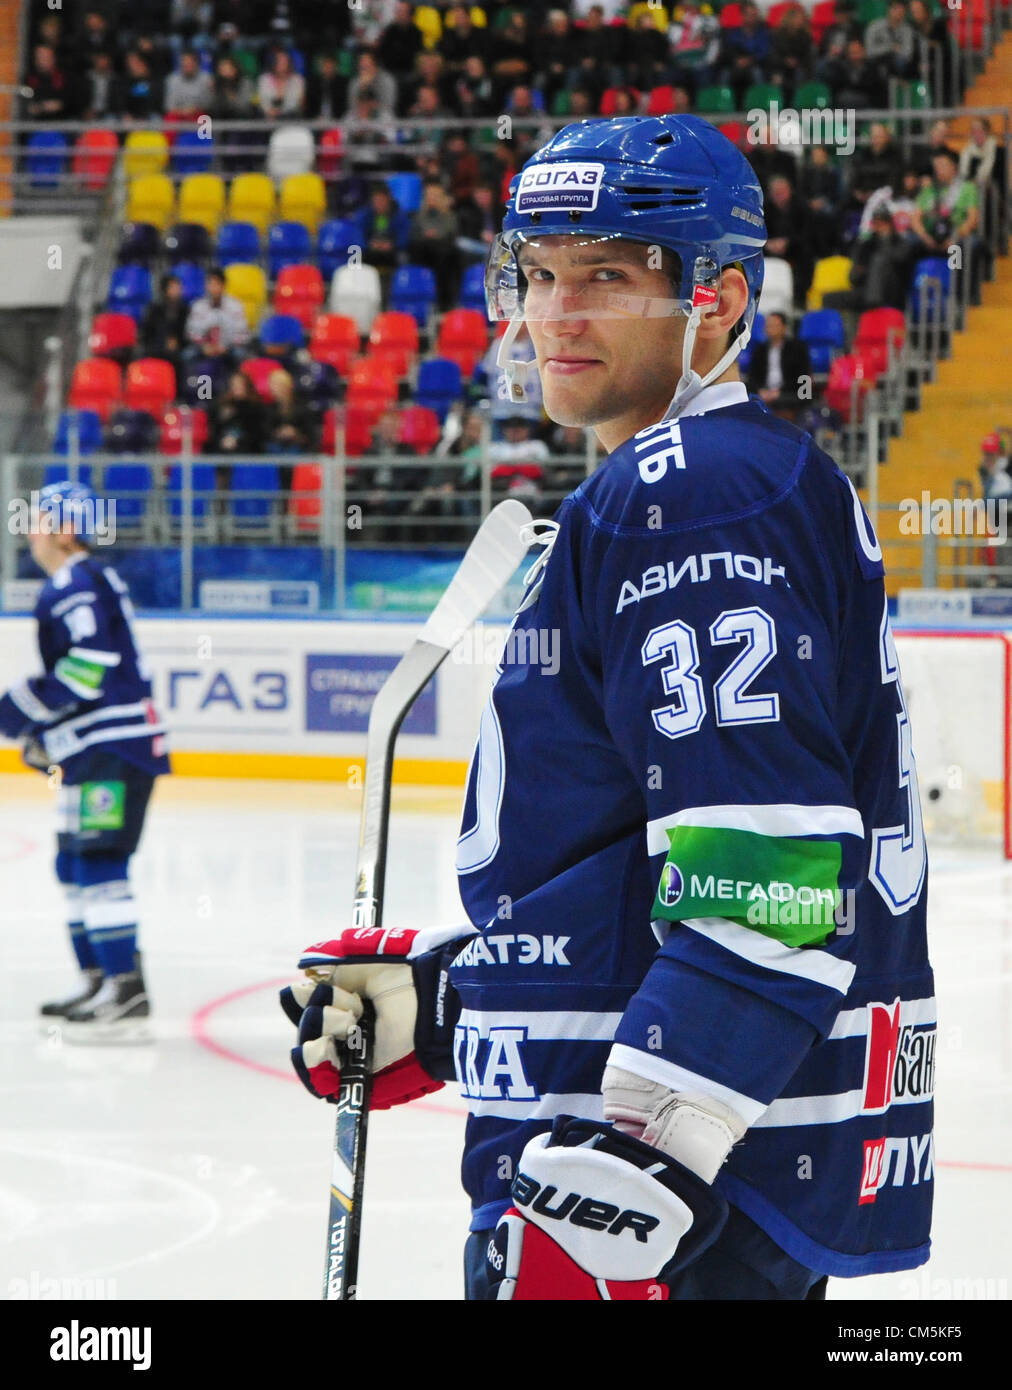 2012 KHL standings: Alexander Ovechkin leading Dynamo Moscow to